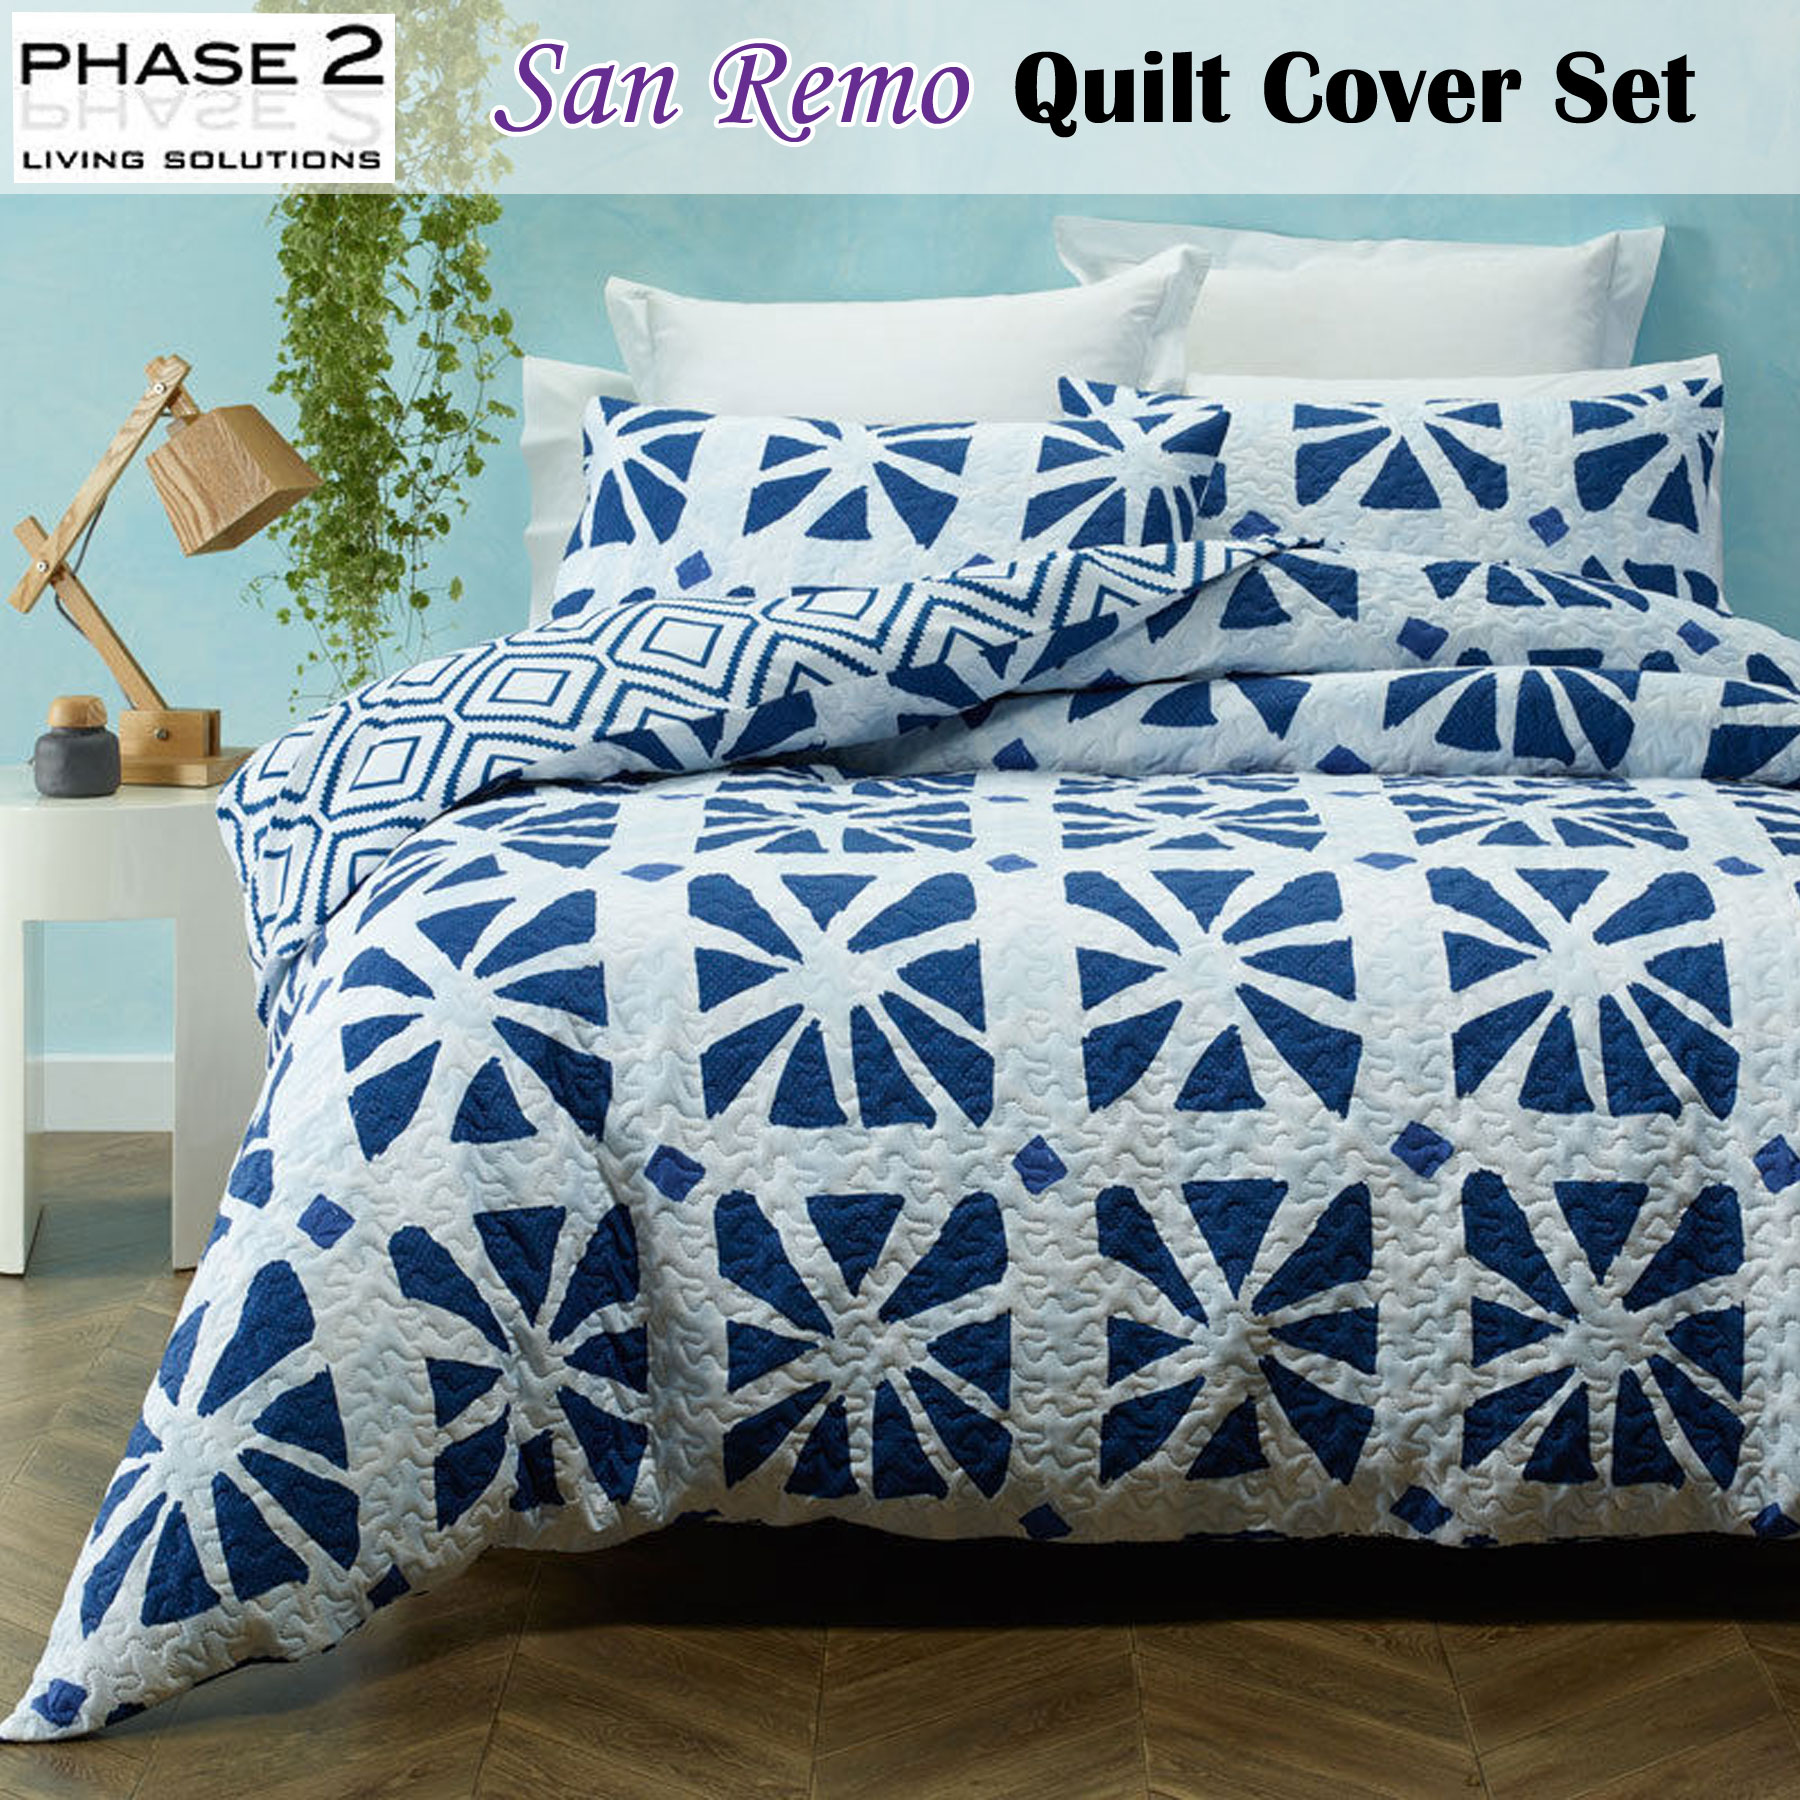 3 Pce San Remo Blue Quilted Duvet Doona Quilt Cover Set By Phase 2